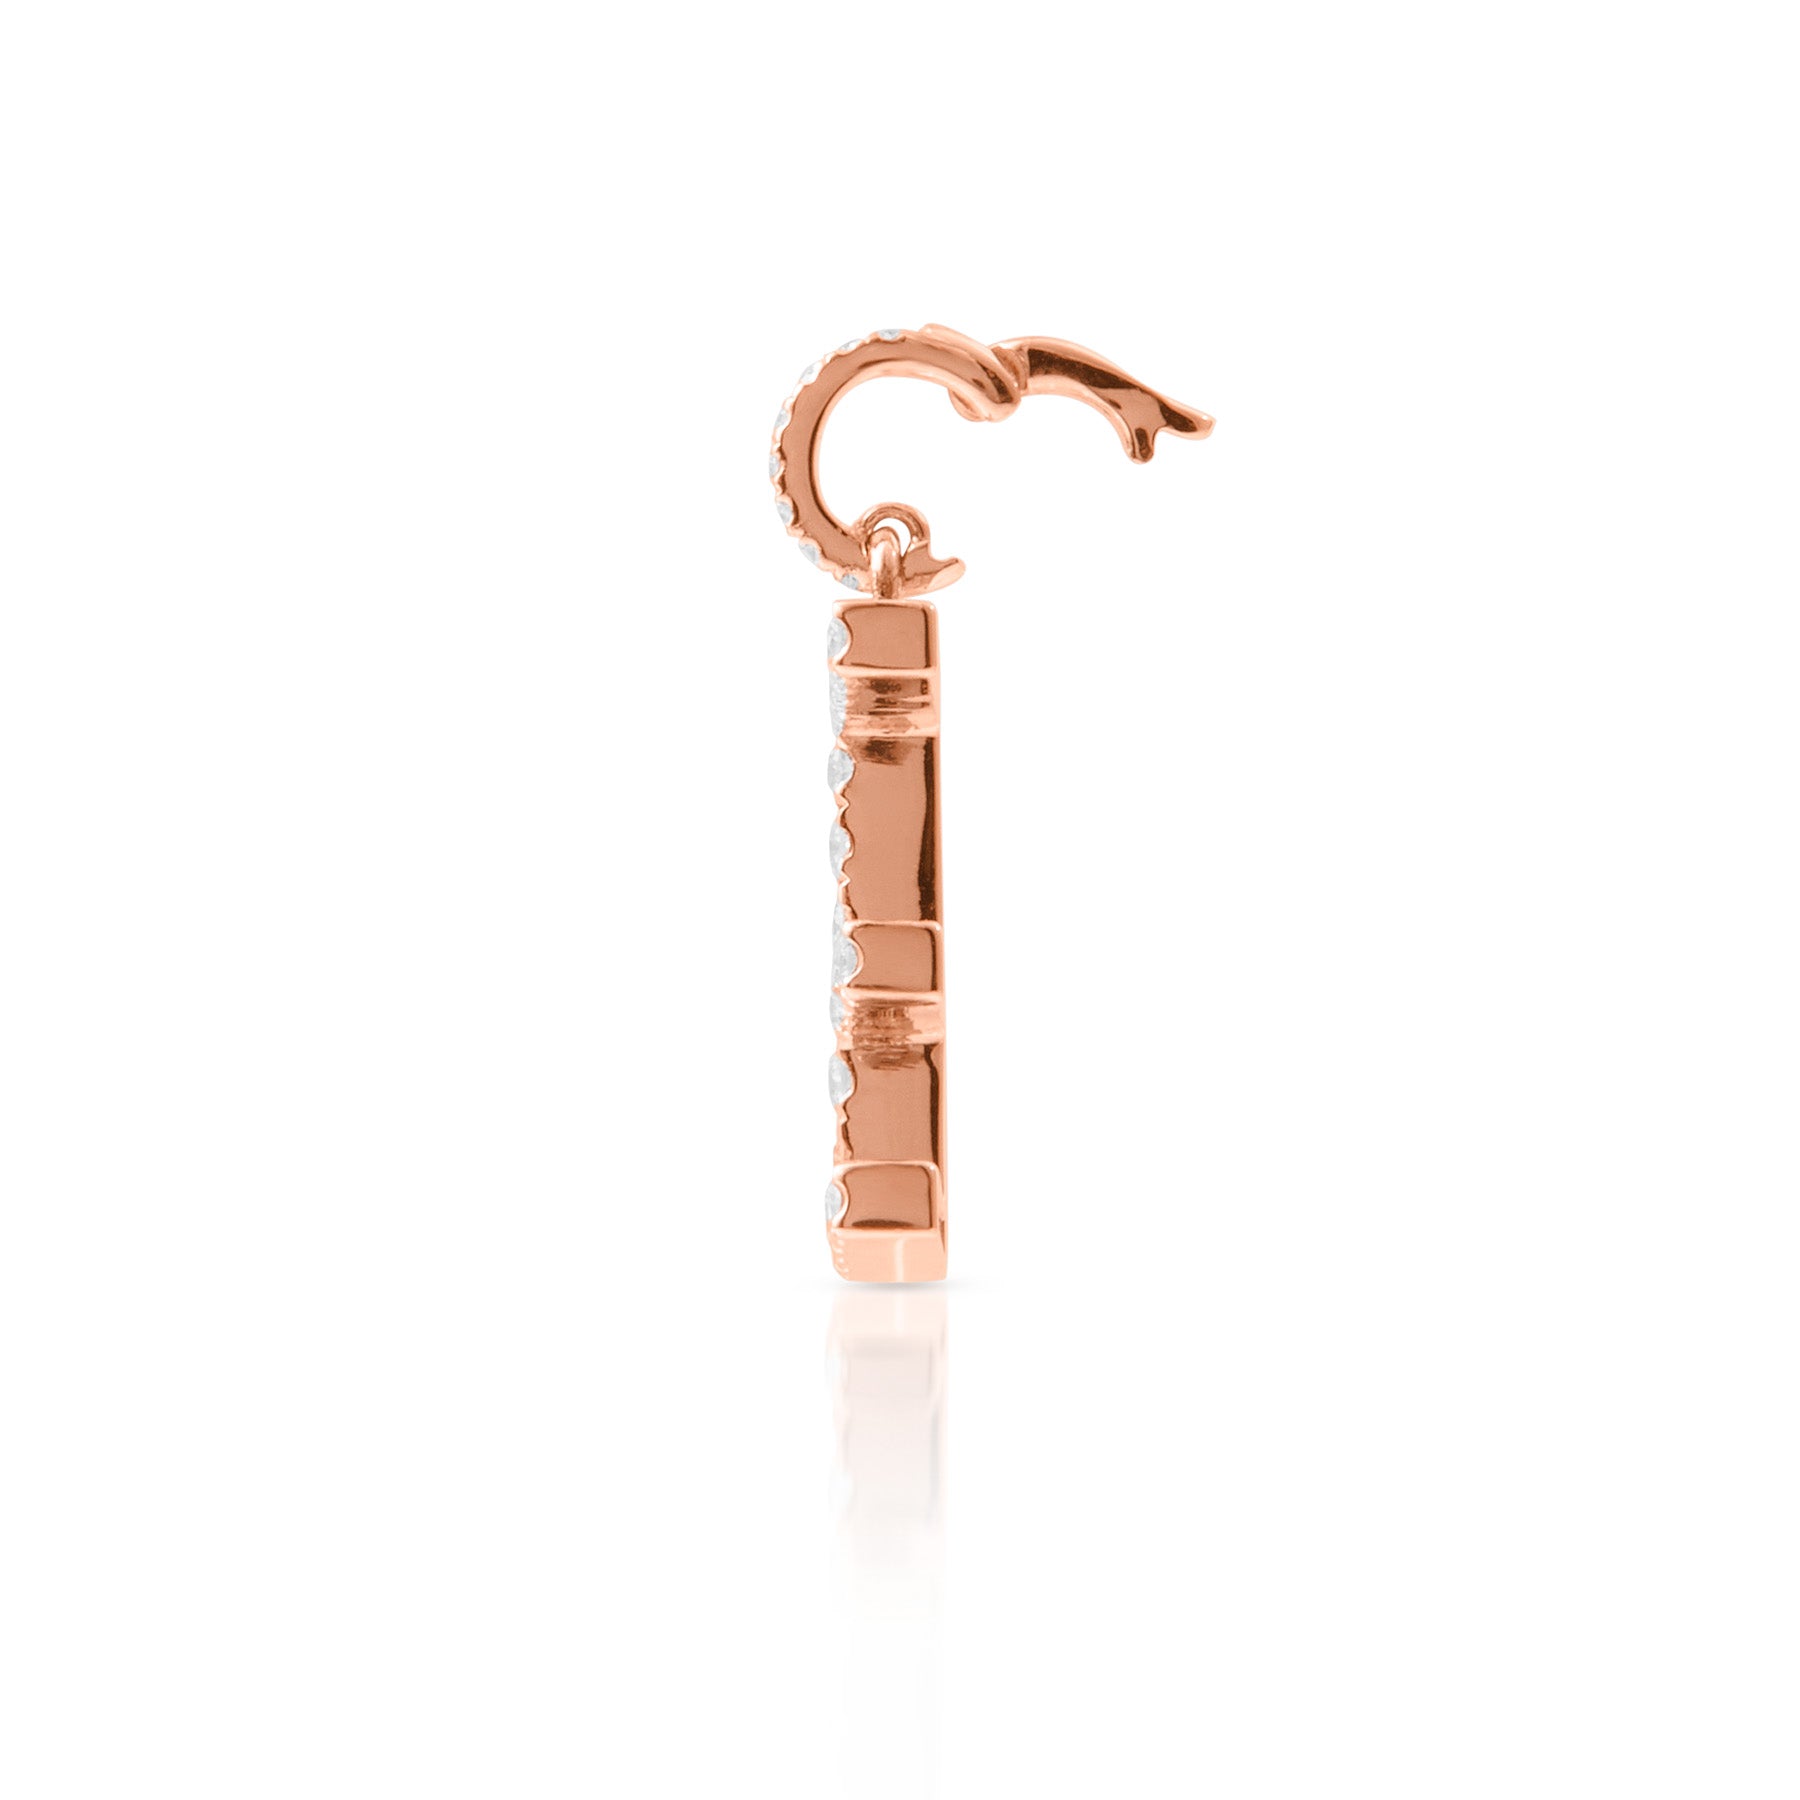 14KT Rose Gold Diamond Initial Charm Pendant with Diamond Clip on Bail